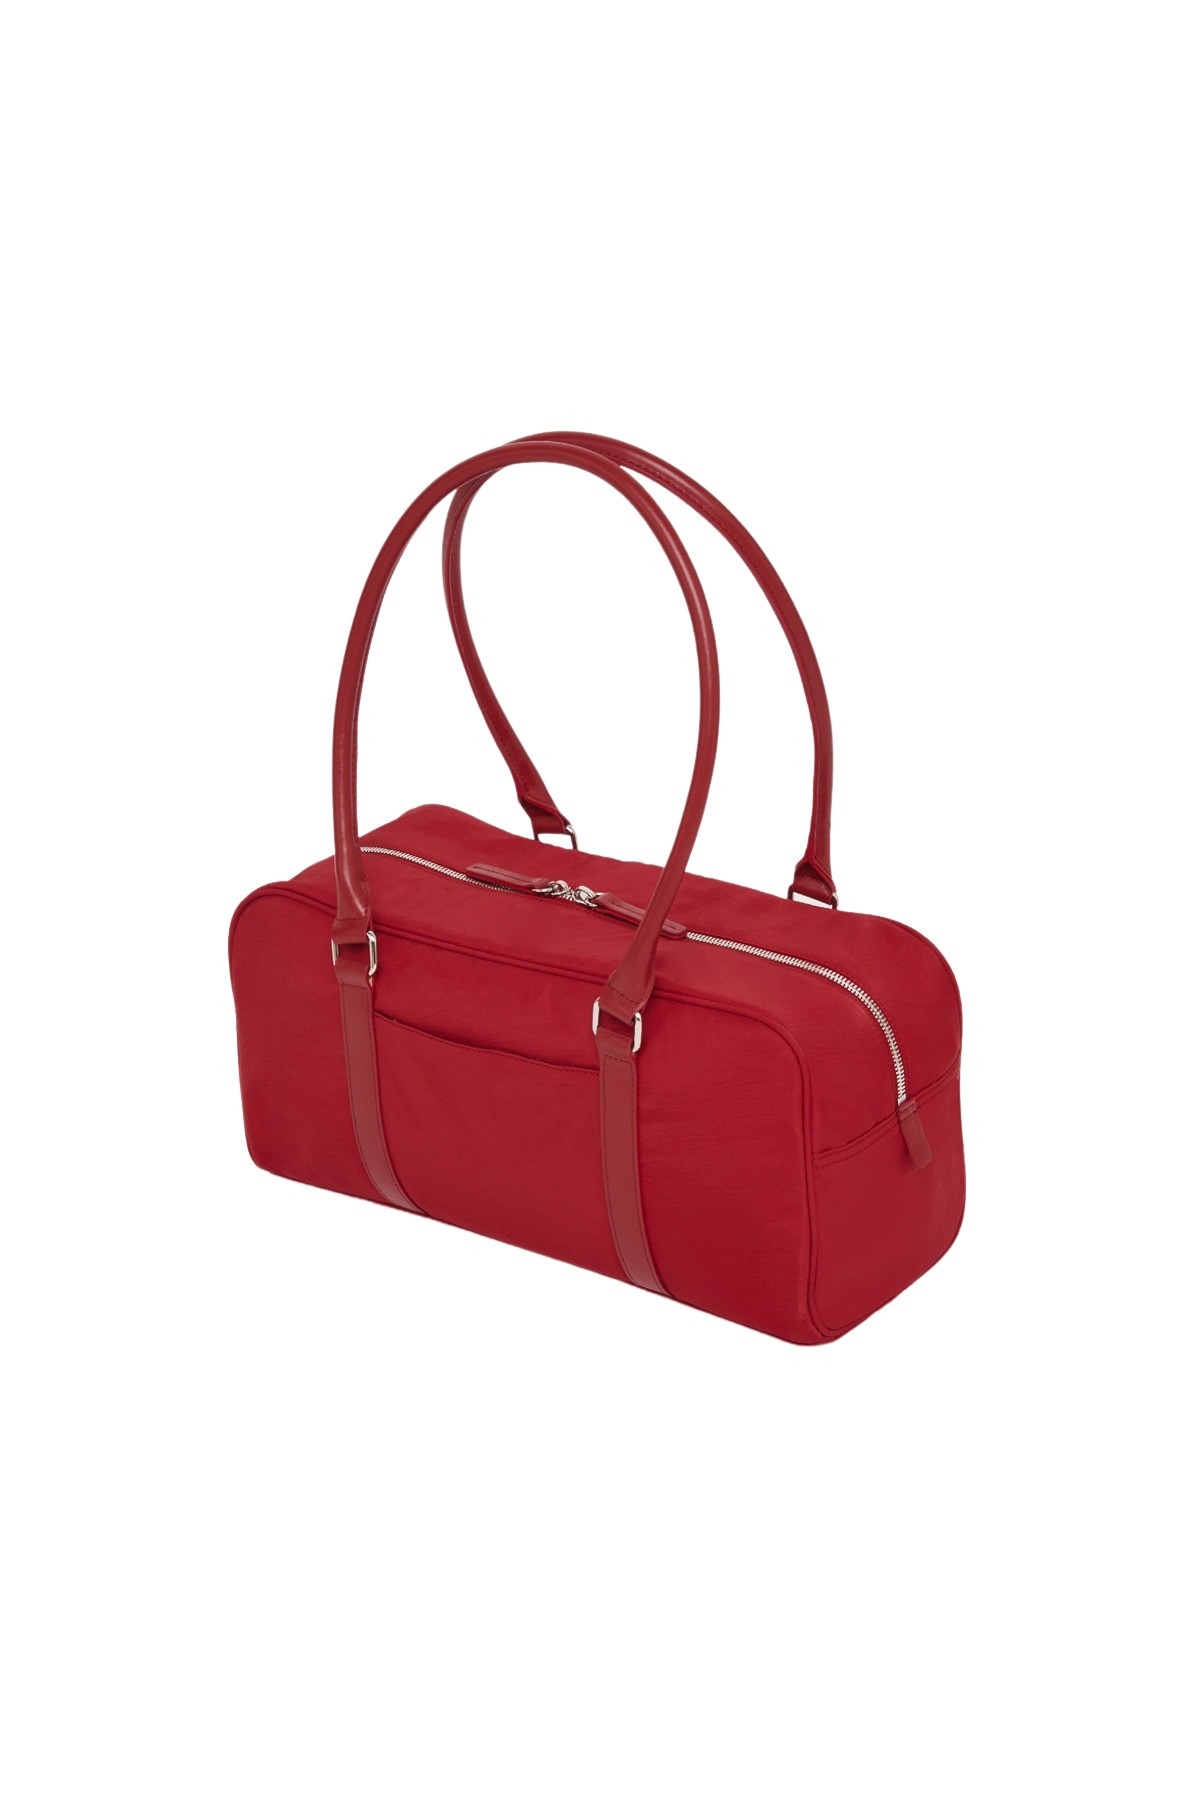 SPORTY TOTE BAG IN RED